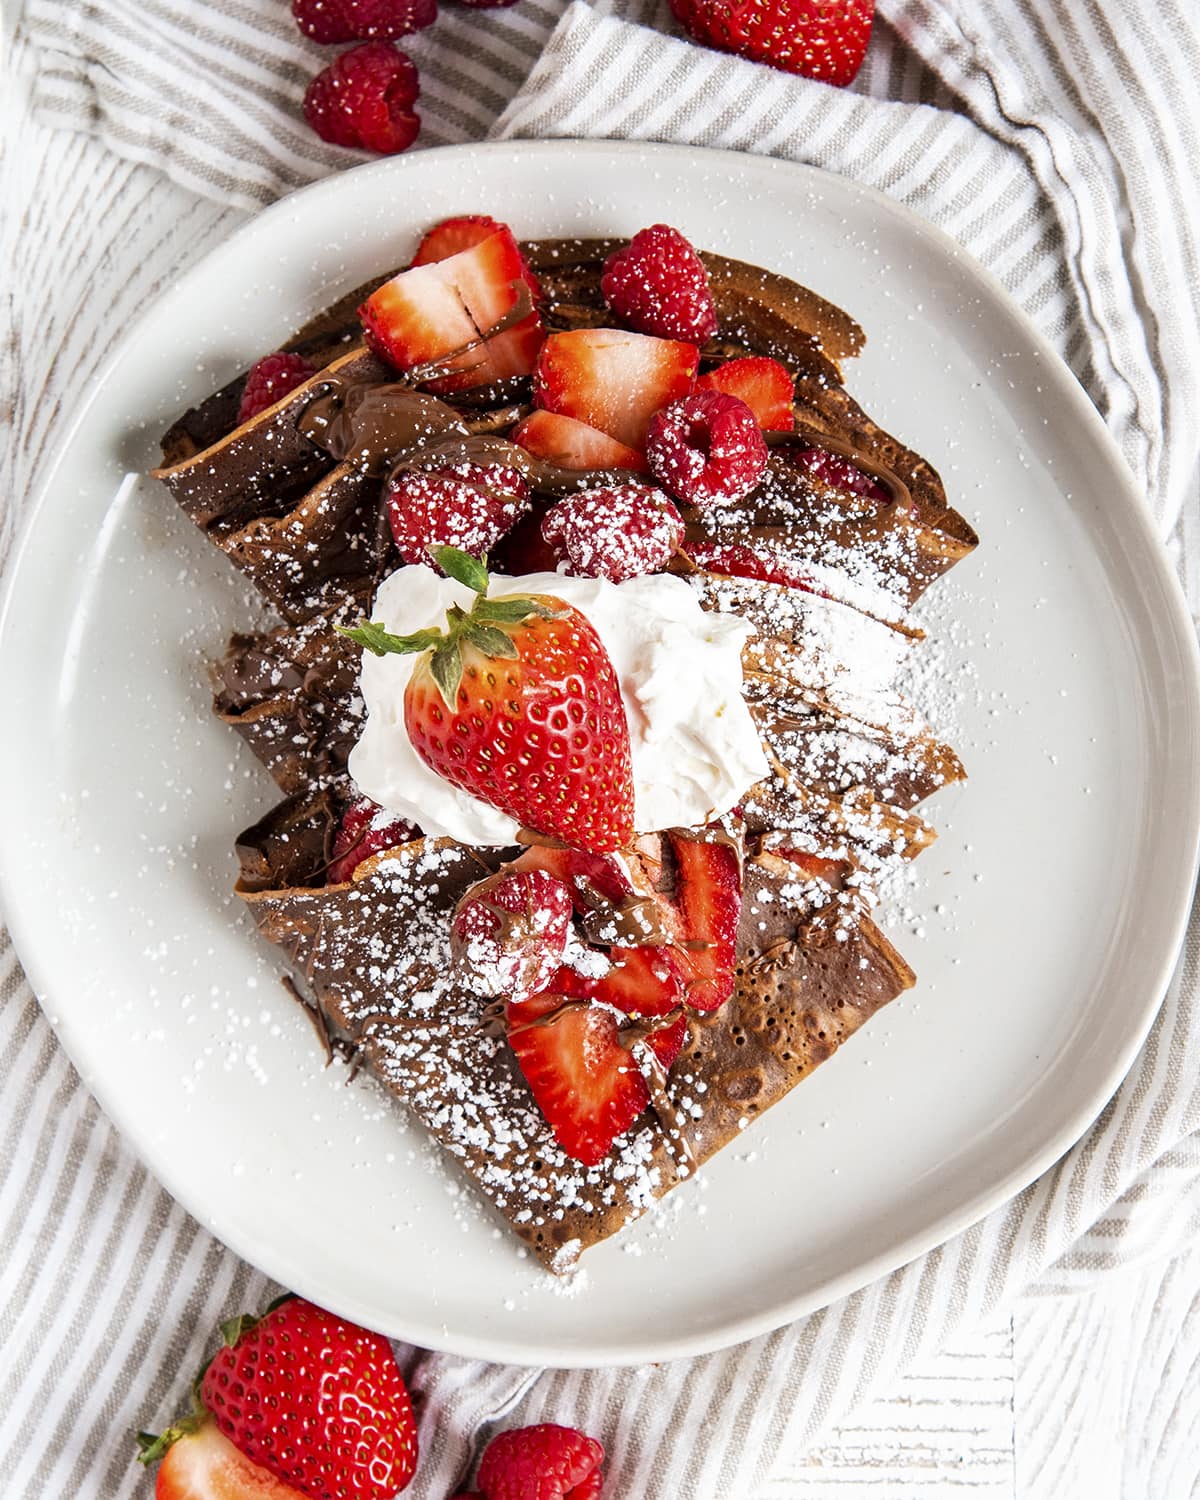 An overhead photo of chocolate crepes with strawberries, powdered sugar, and whipped cream on a plate.